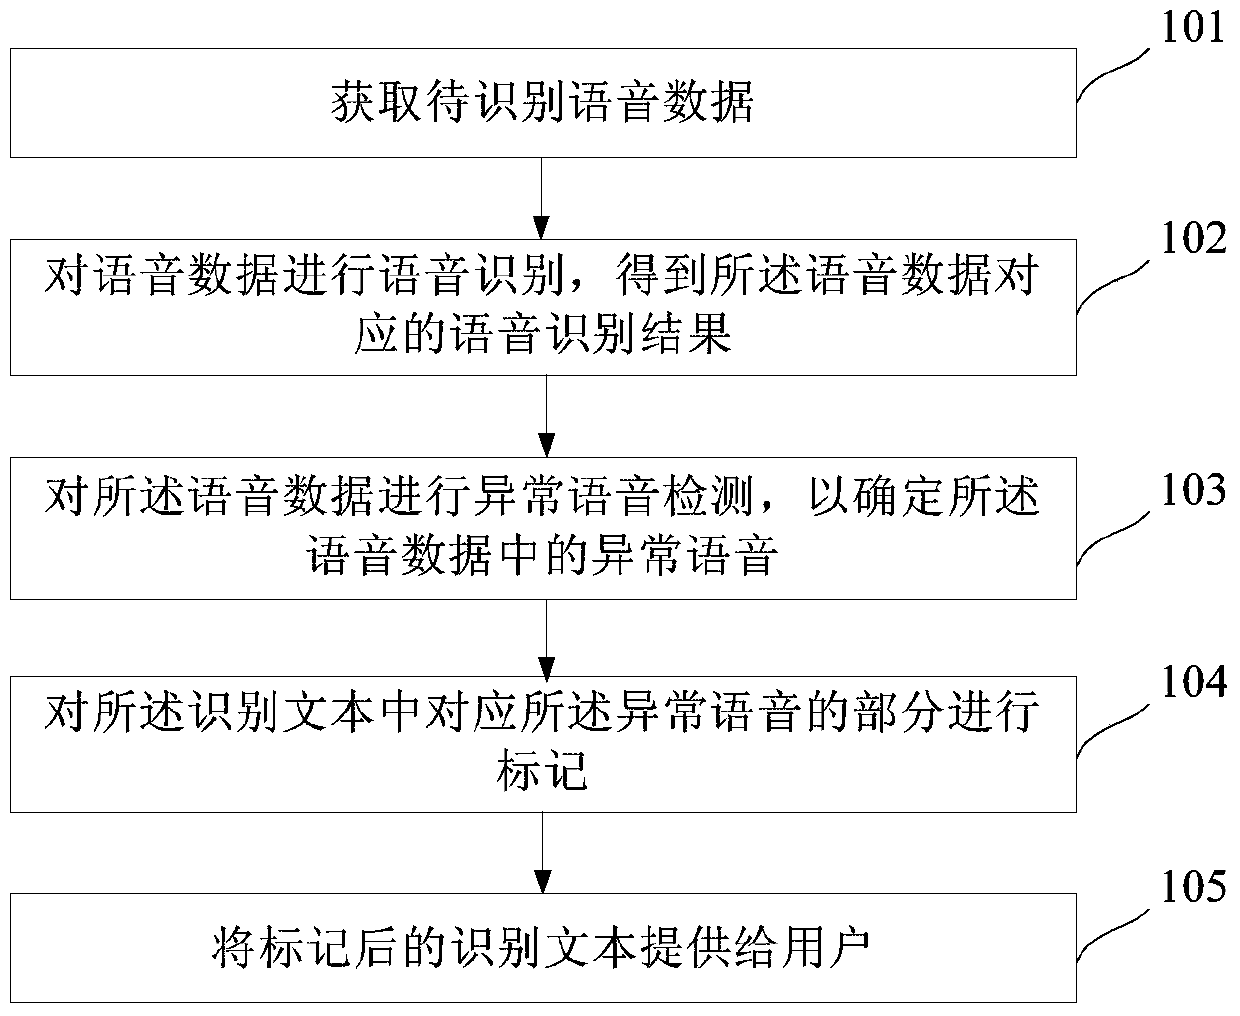 Speech recognition text processing method and system